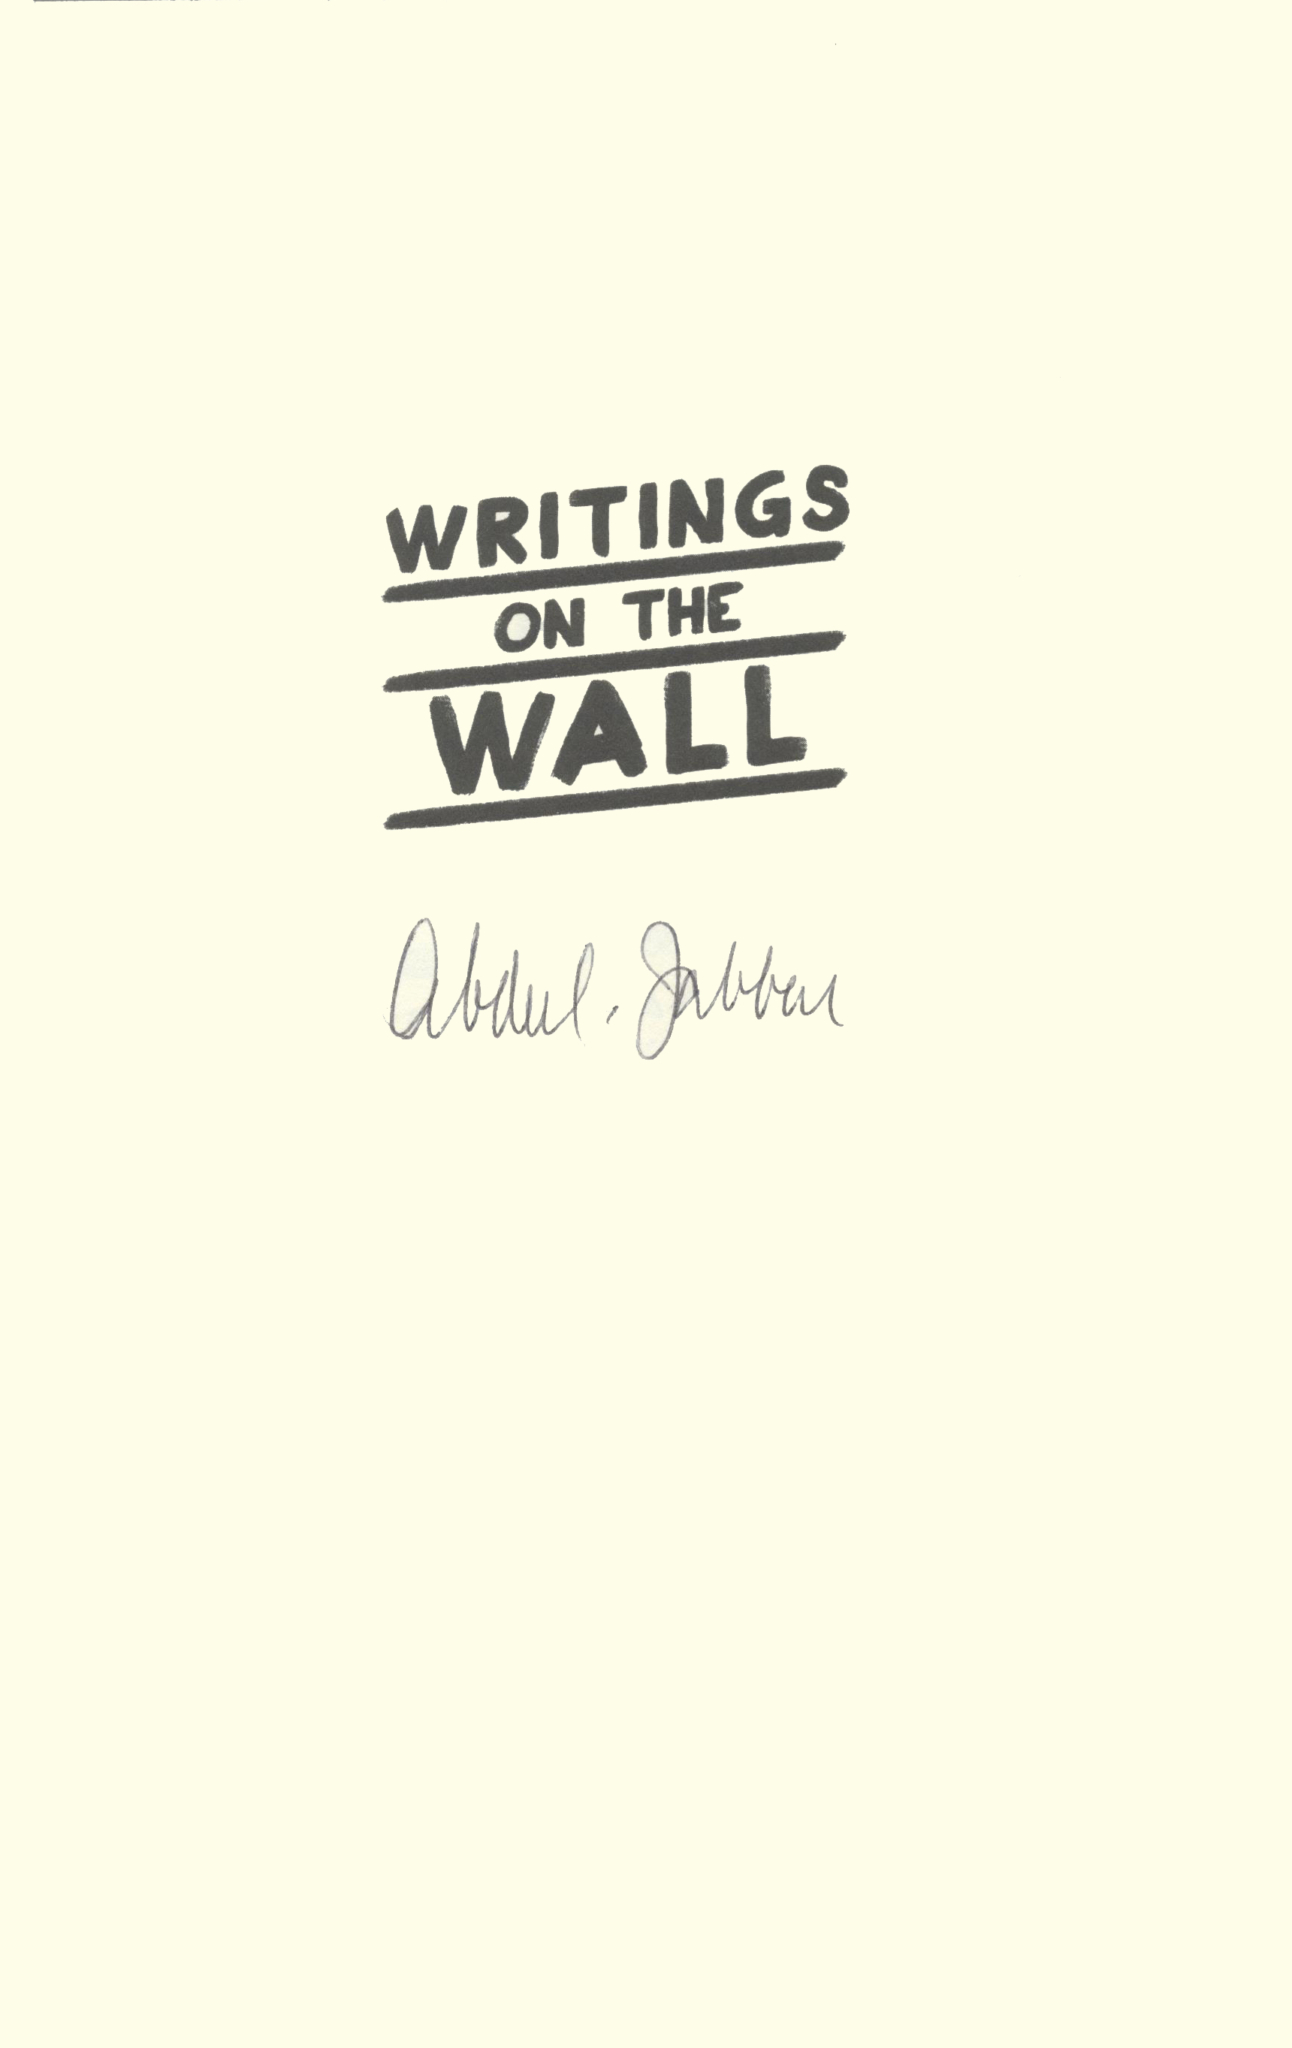 Abdul Jabbar Kareem Writings on the Wall 15 books for Black History Month recommended by Birmingham bookstores